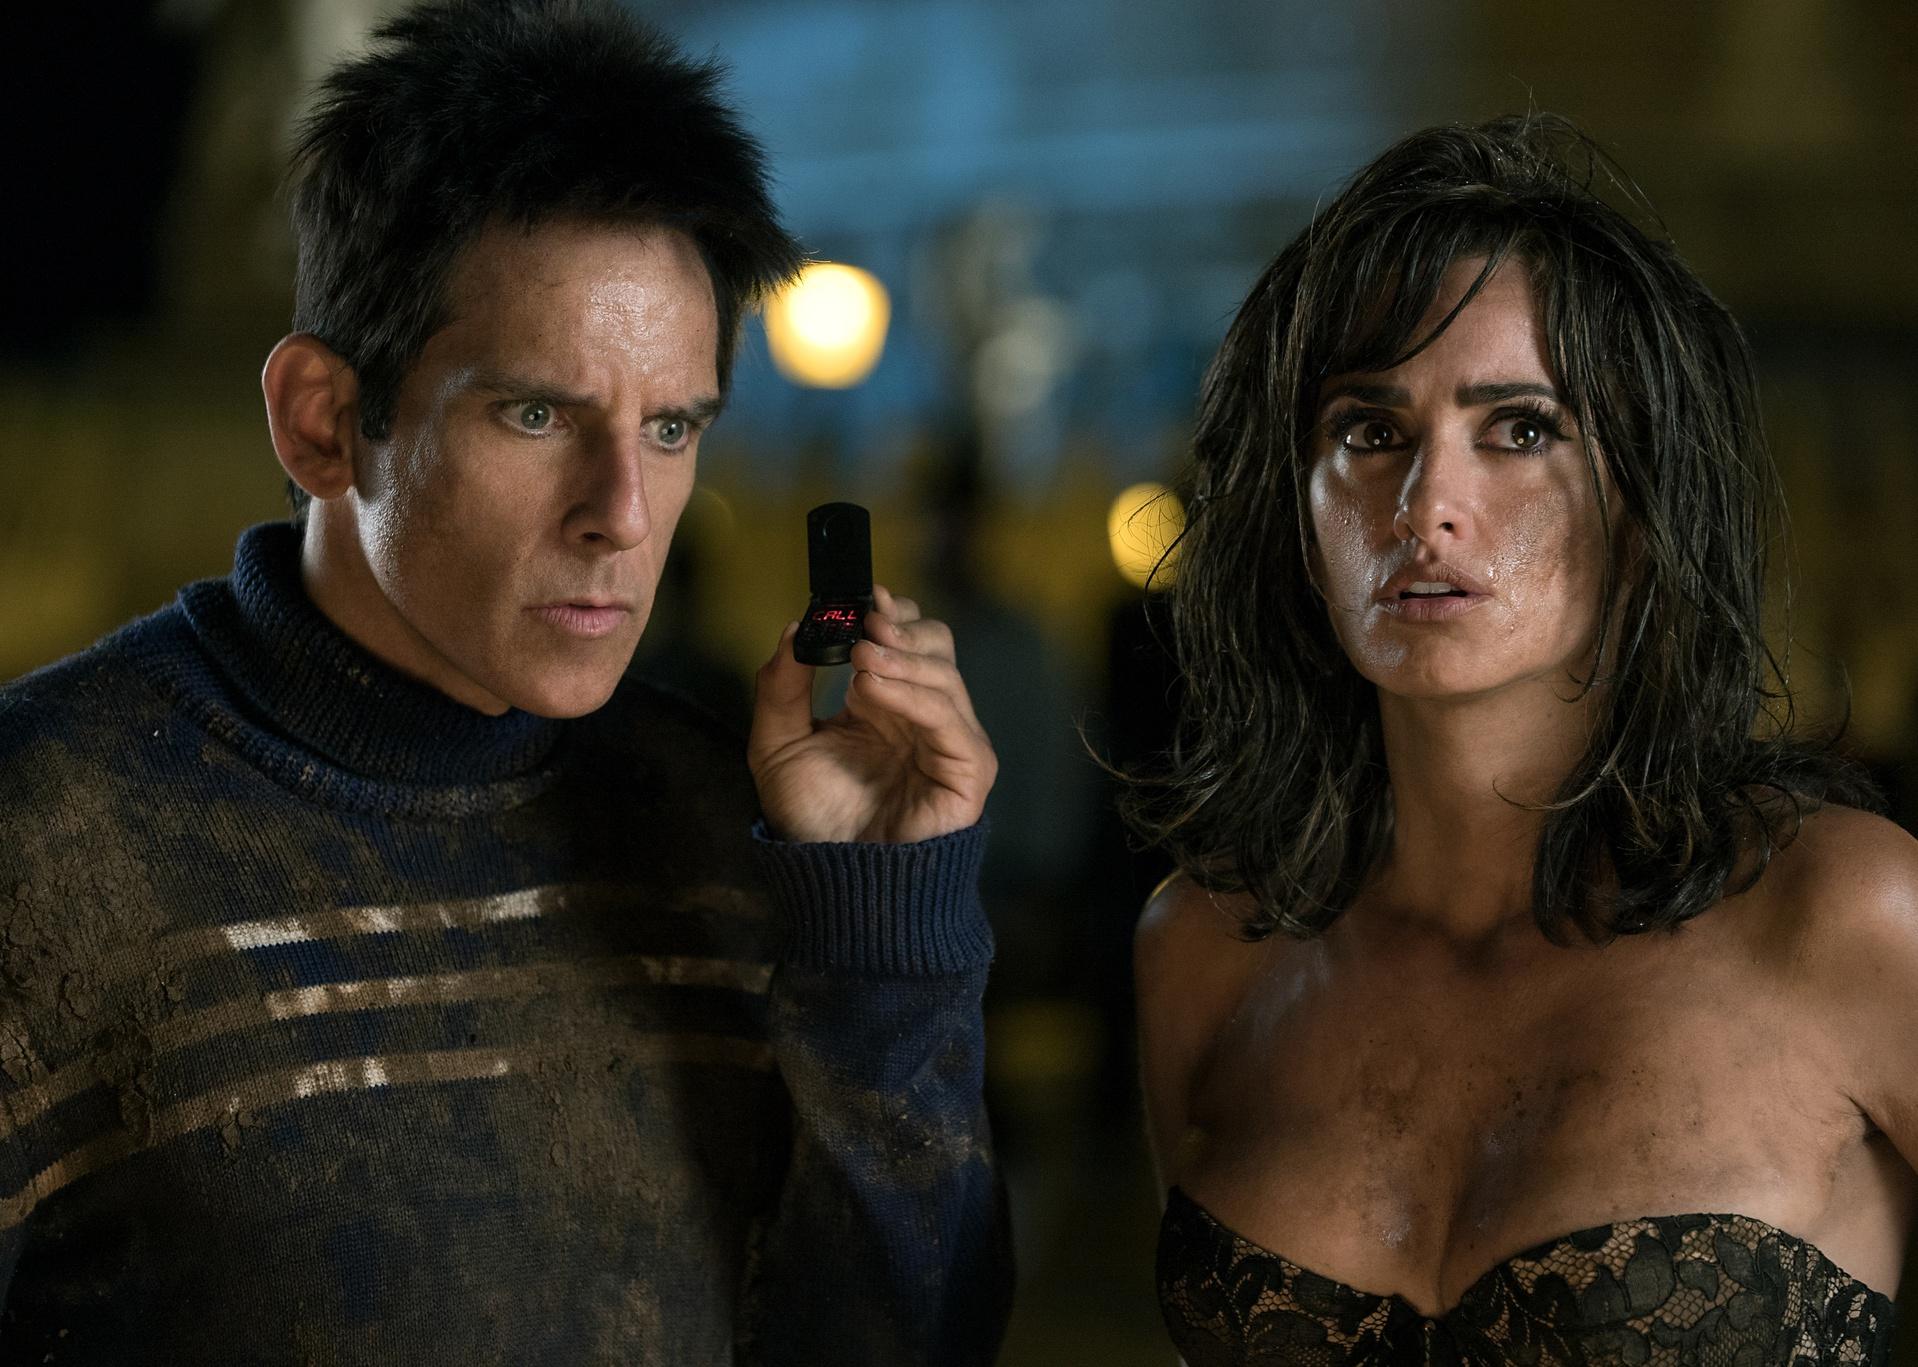 Ben Stiller listening to a tiny flip phoneand Penélope Cruz, both covered in dirt.